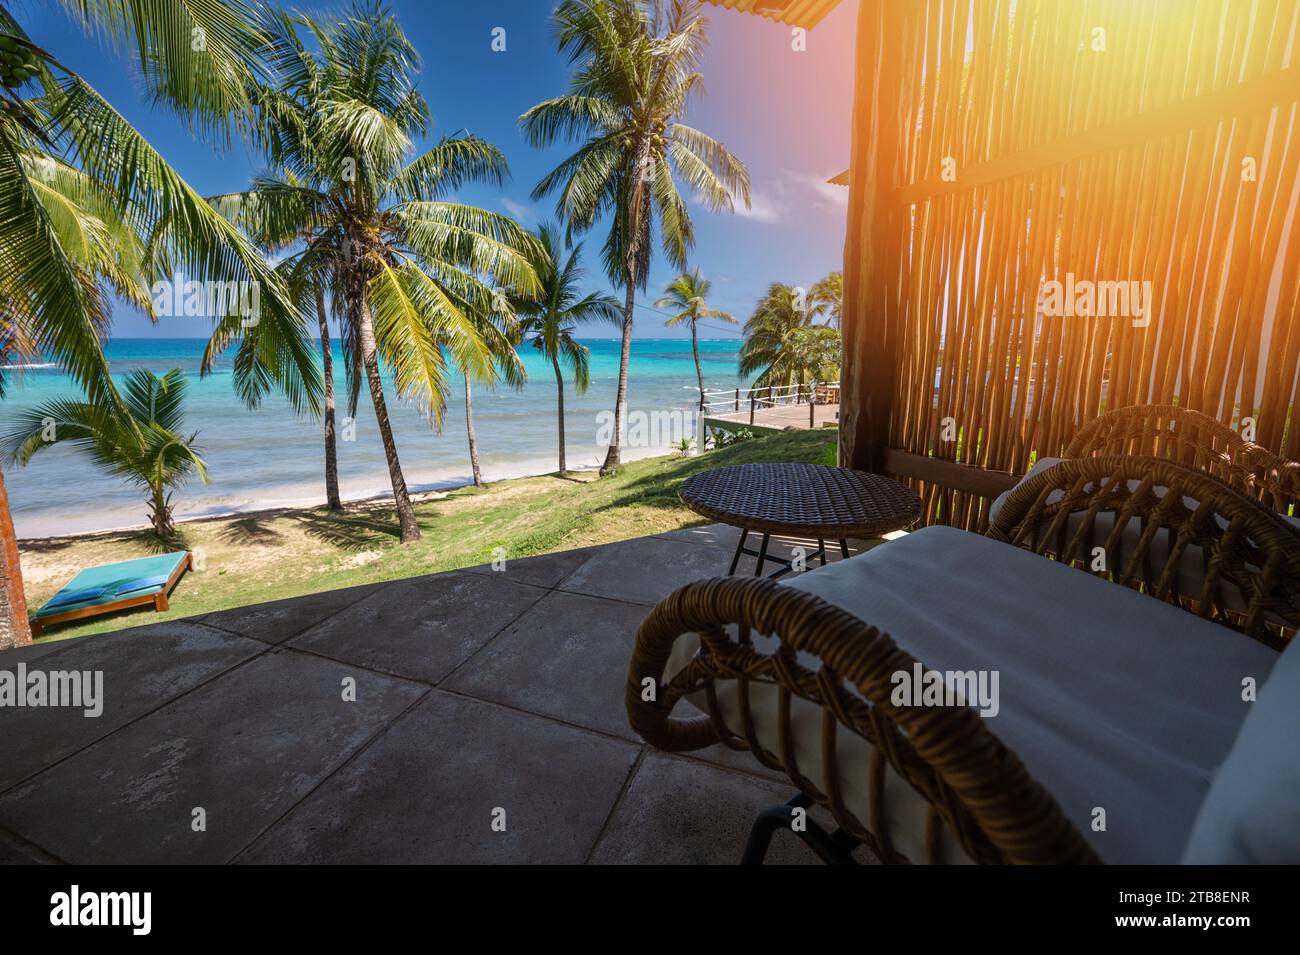 Terrace with table and chair infornt of Caribbean sea beach background Stock Photo